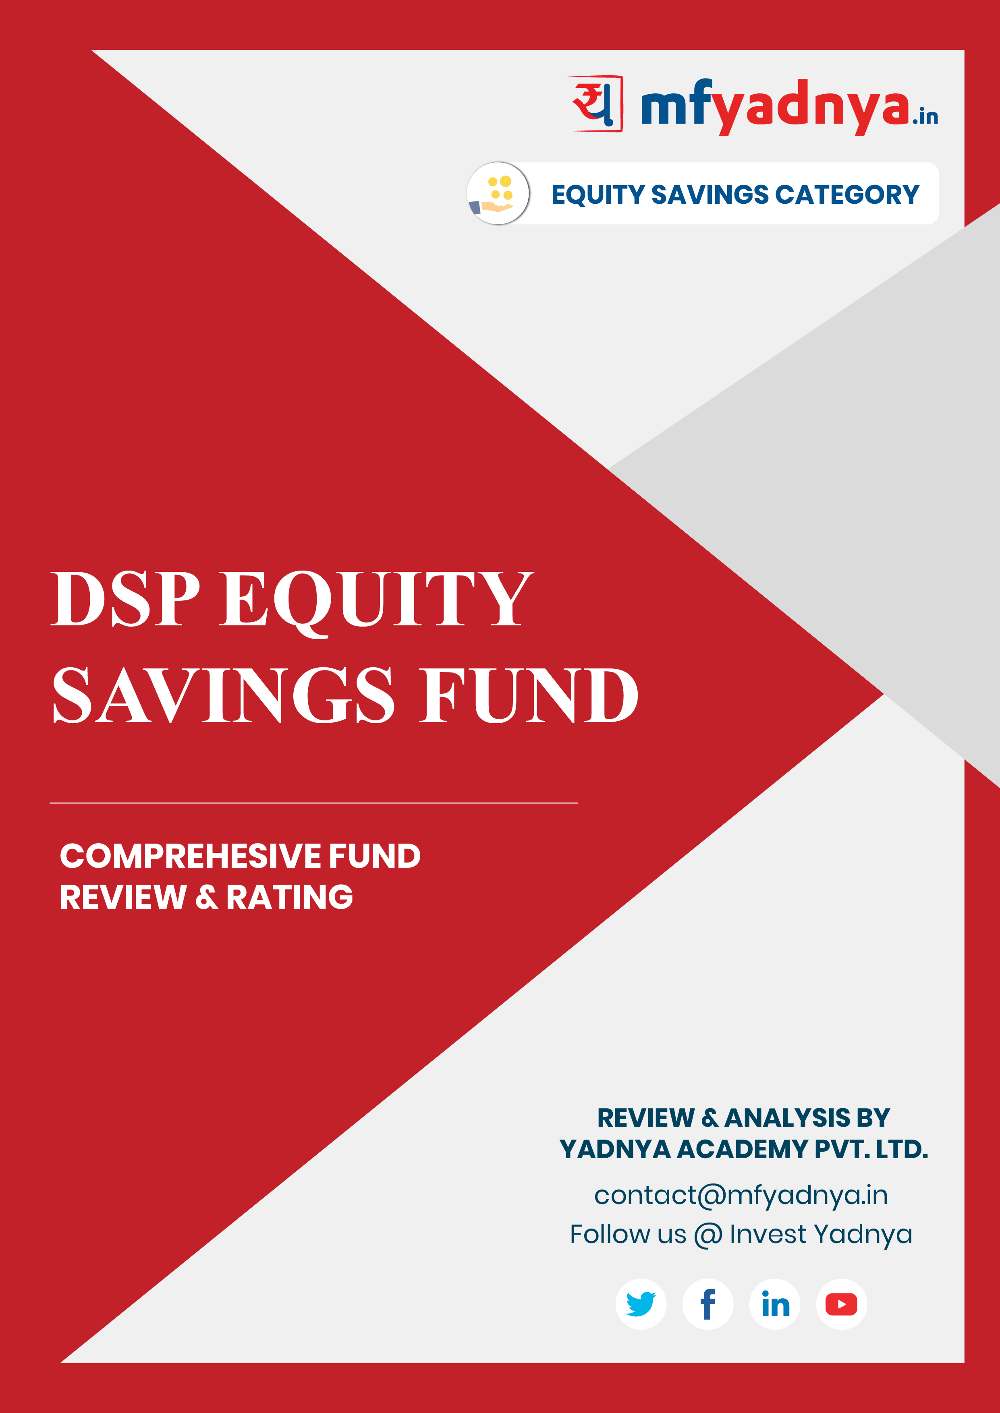 This e-book offers a comprehensive mutual fund review of DSP Equity Savings Fund. It reviews the fund's return, ratio, allocation etc. ✔ Detailed Mutual Fund Analysis ✔ Latest Research Reports